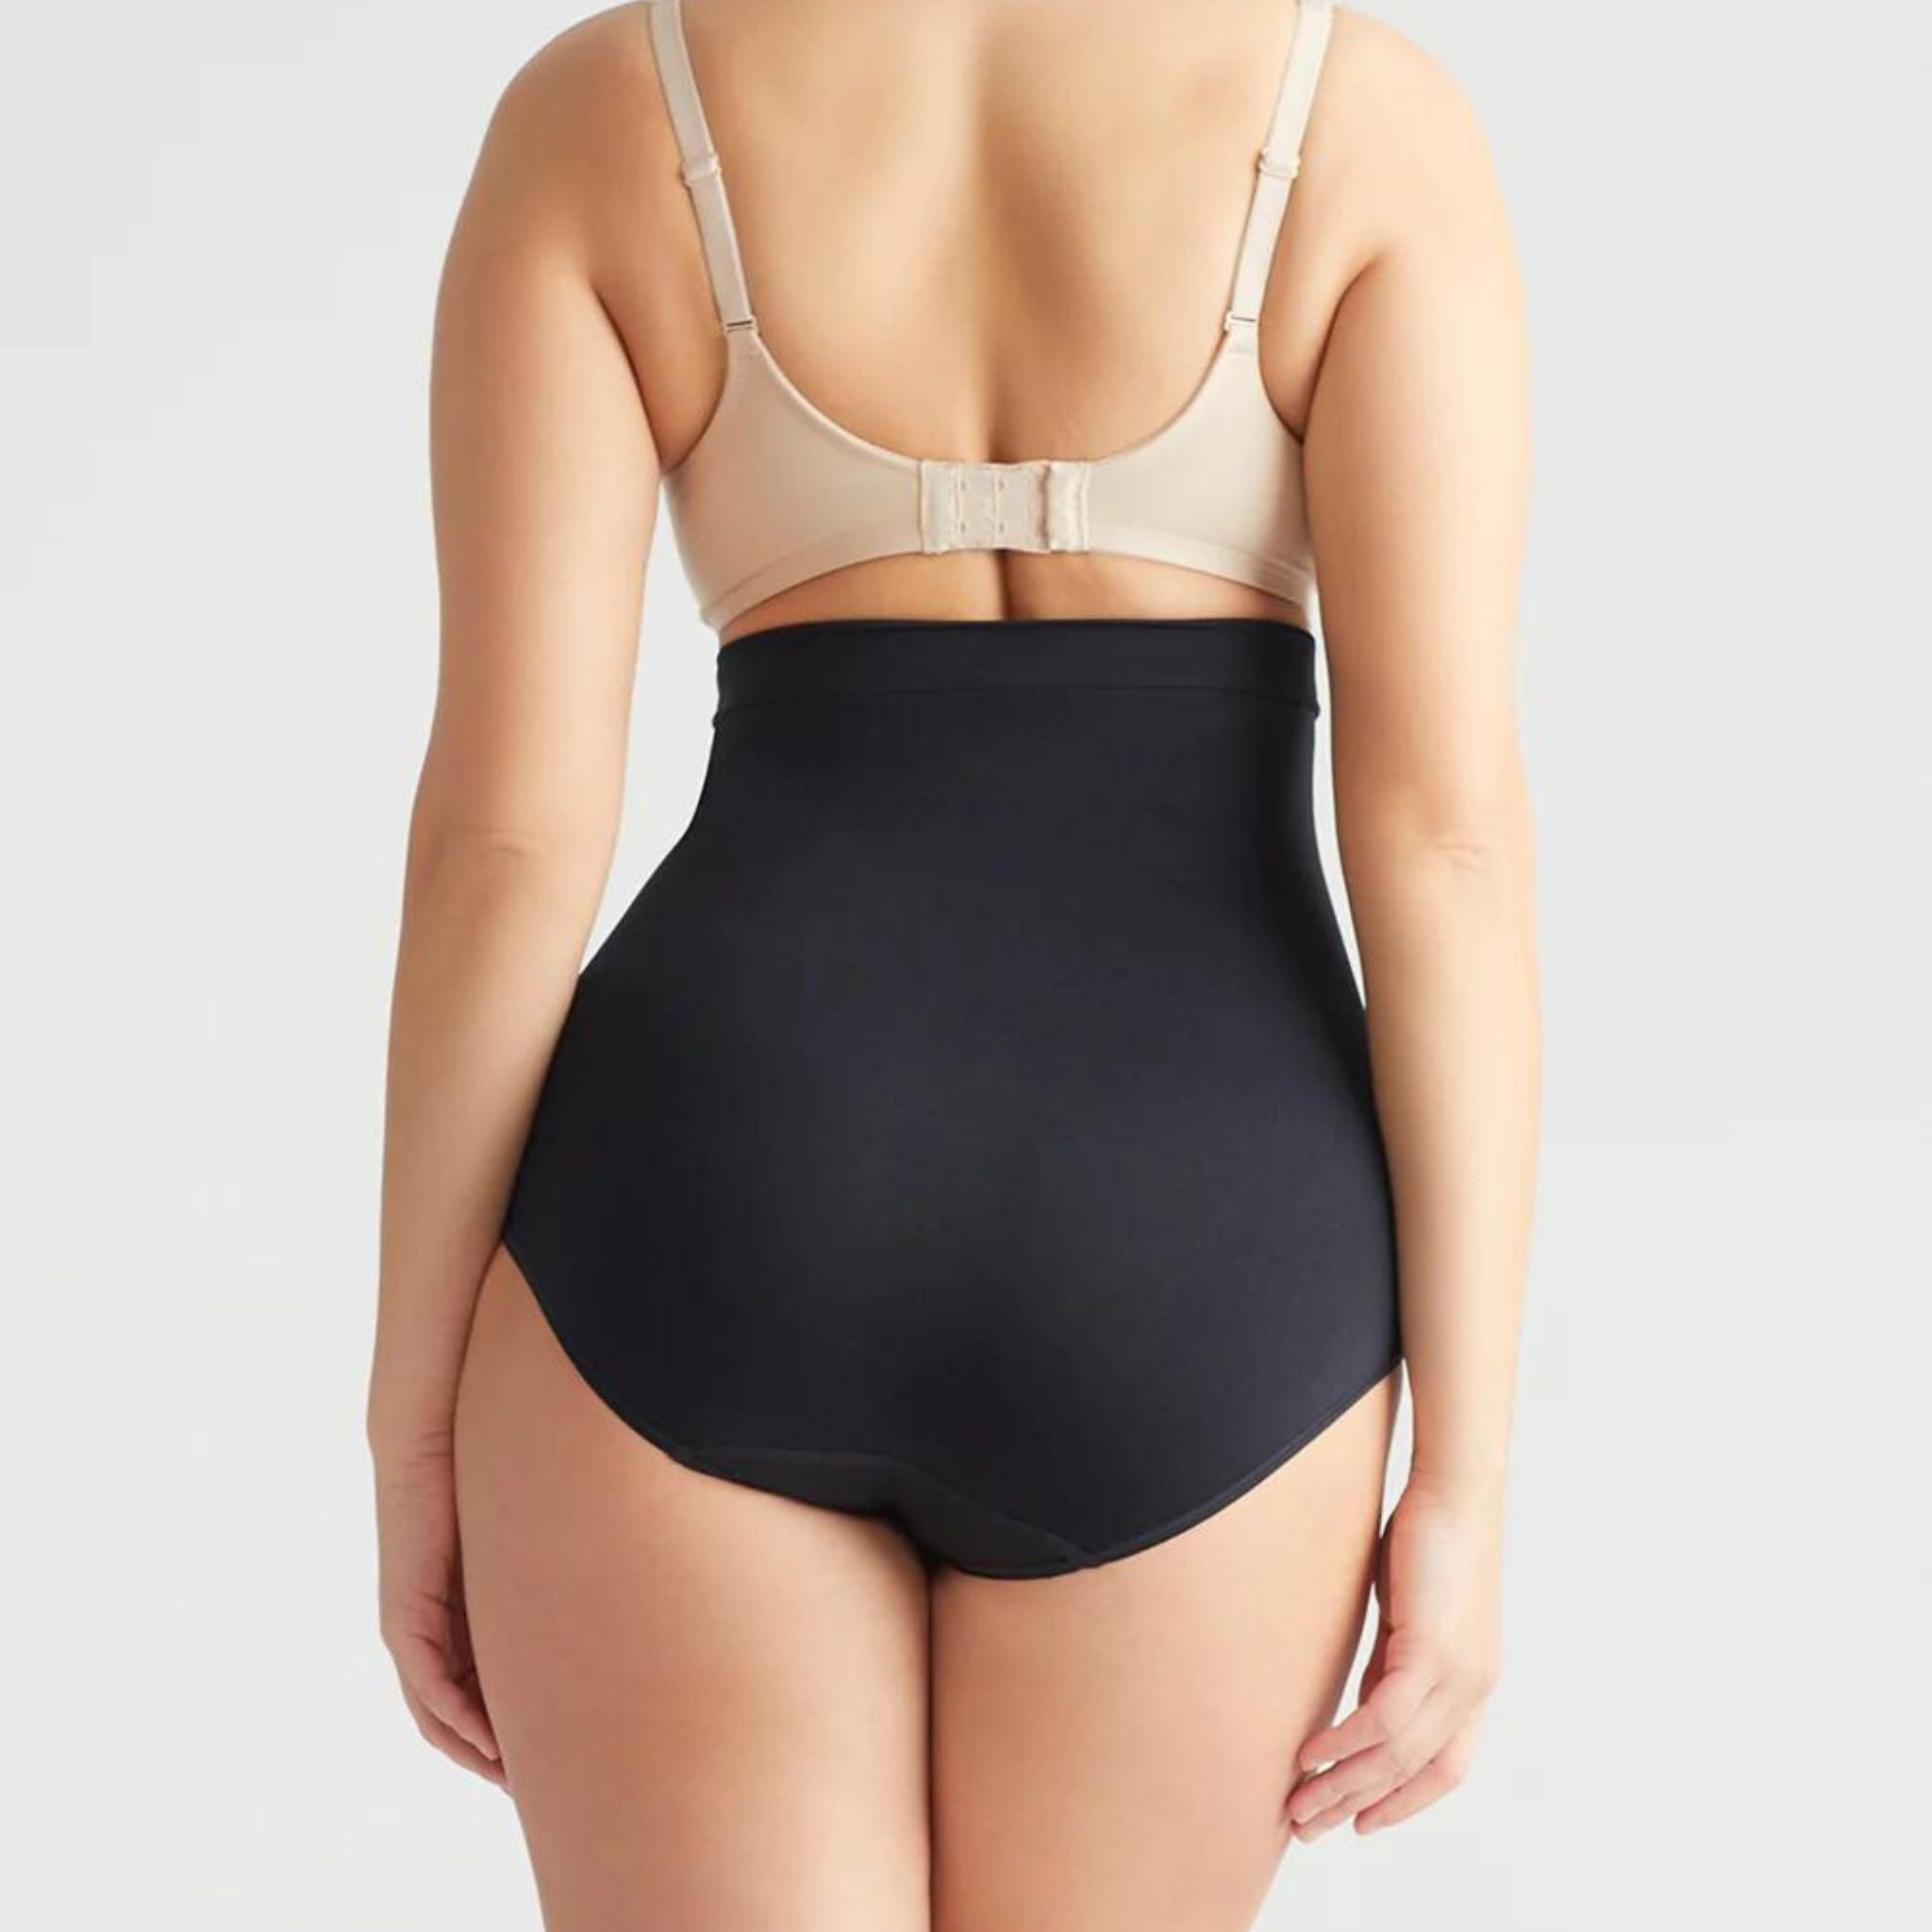 This high waist brief offers firm support and smooths your tummy with our Yummie Hug.  Level 4 firm shaping  Targeted waist shaping  Seamless styling gives you complete allover smoothing  Smooths and shapes comfortably everyday  Soft silicone at waist provides no-slip confidence  High-waist design sits just below the bra line